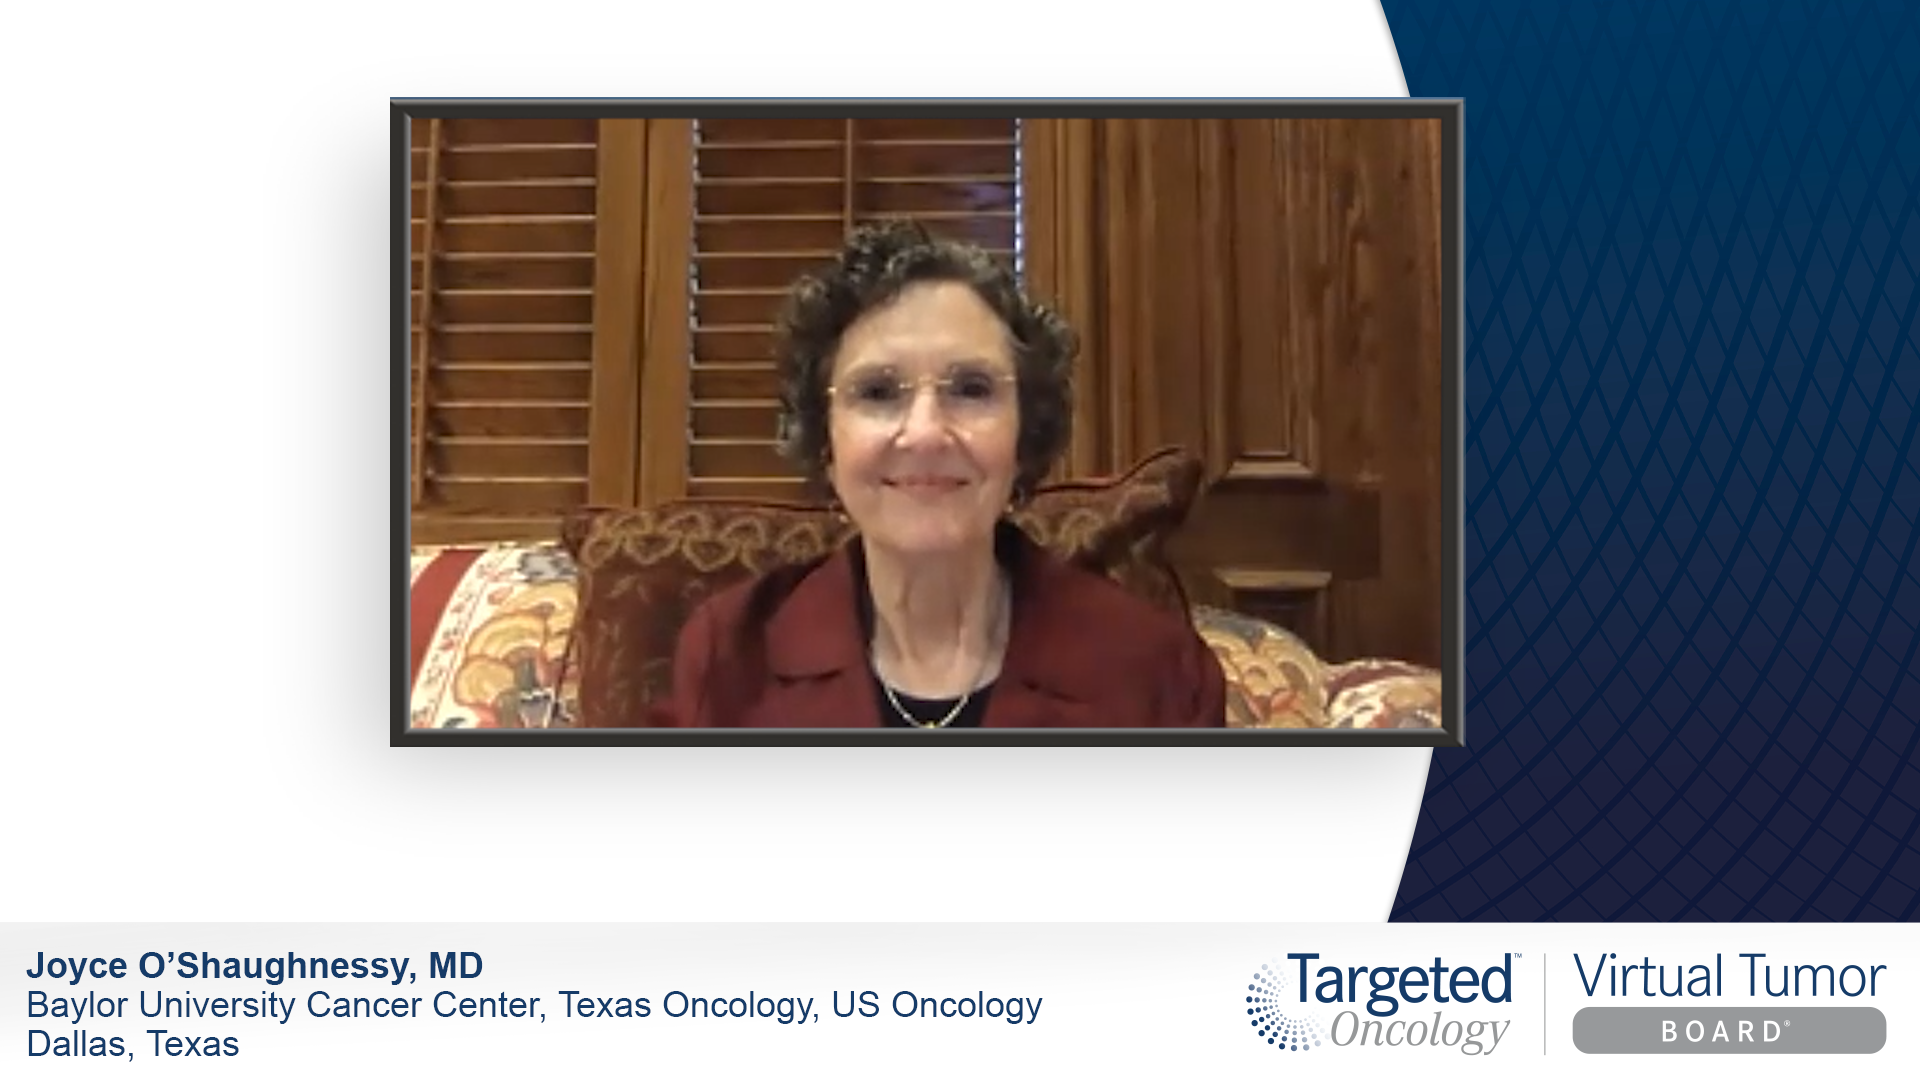 Case 2: Looking at Data in Breast Cancer Patients With Brain Mets